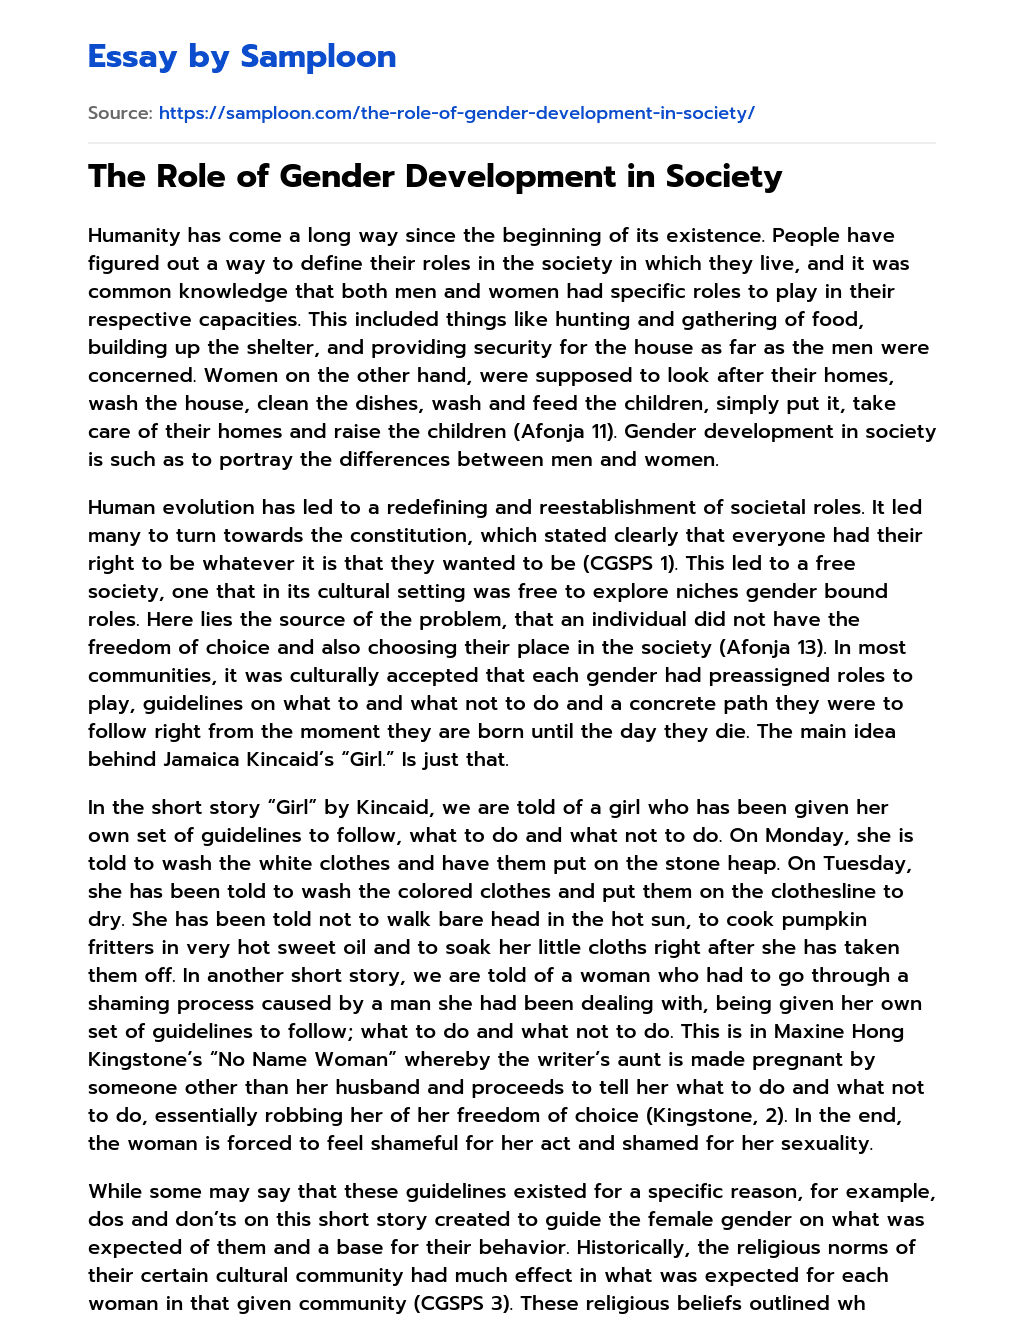 The Role of Gender Development in Society essay